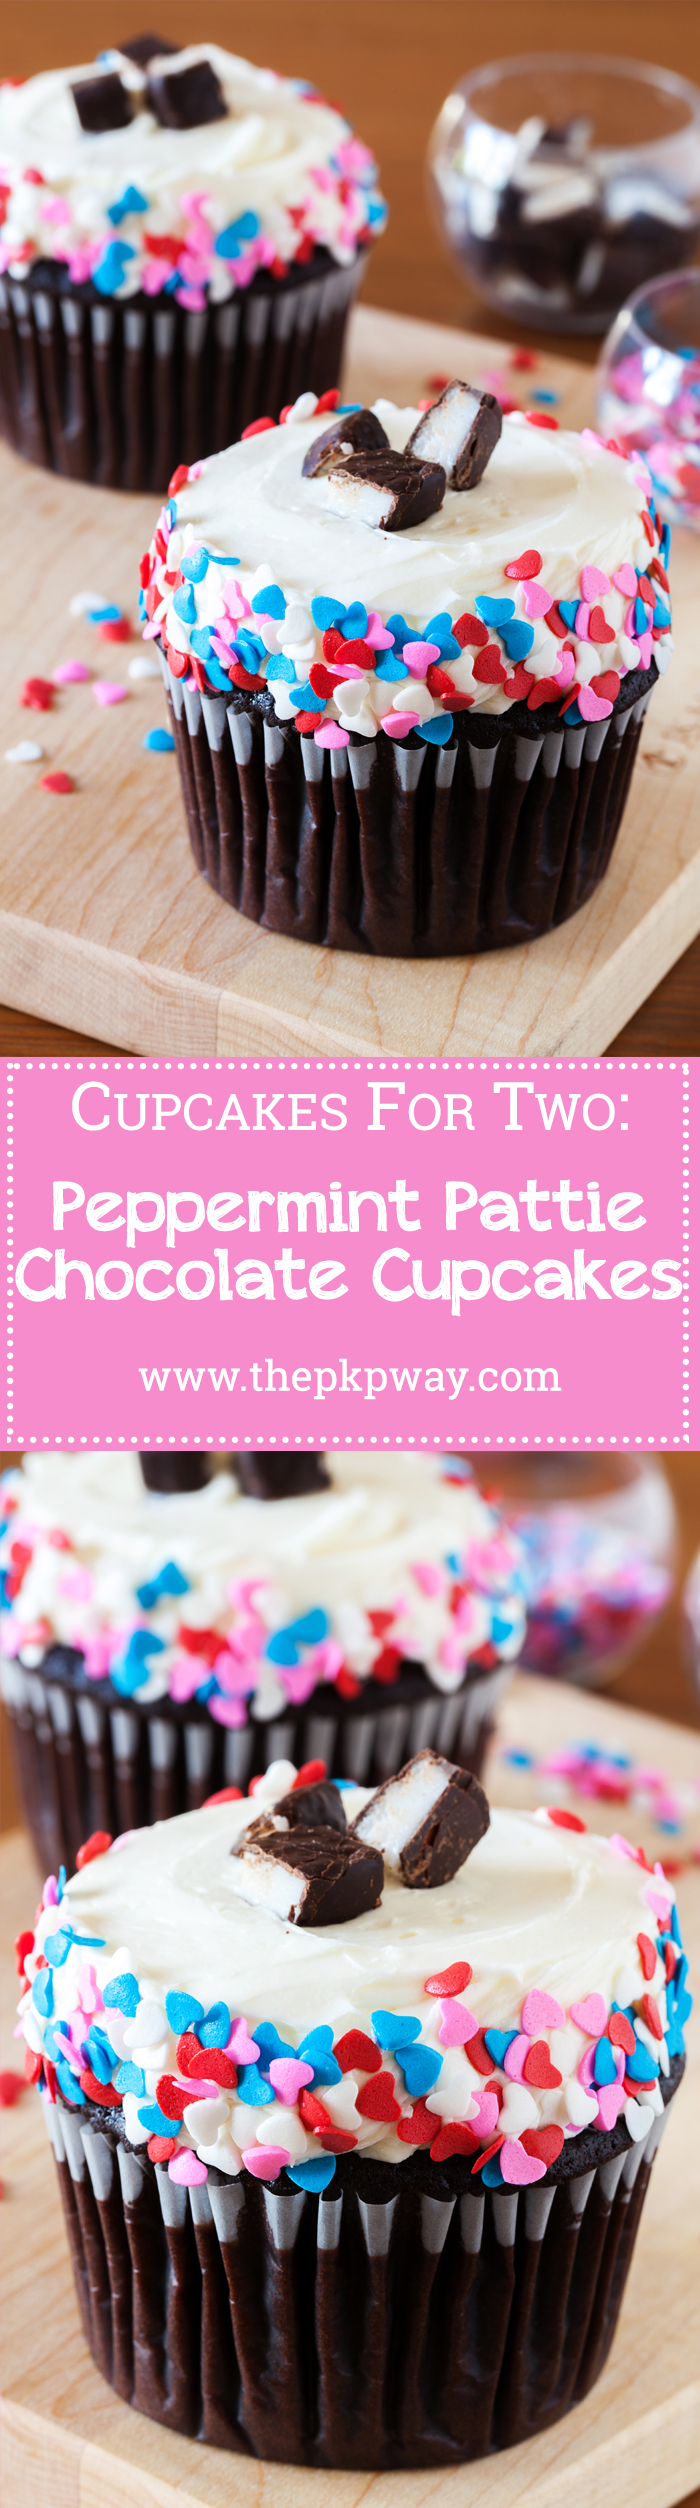 Valentine's Day Peppermint Pattie Chocolate Cupcakes for Two. A chocolate cupcake recipe for two is perfect for you and your Valentine. Ultra-moist and topped with peppermint pattie buttercream.